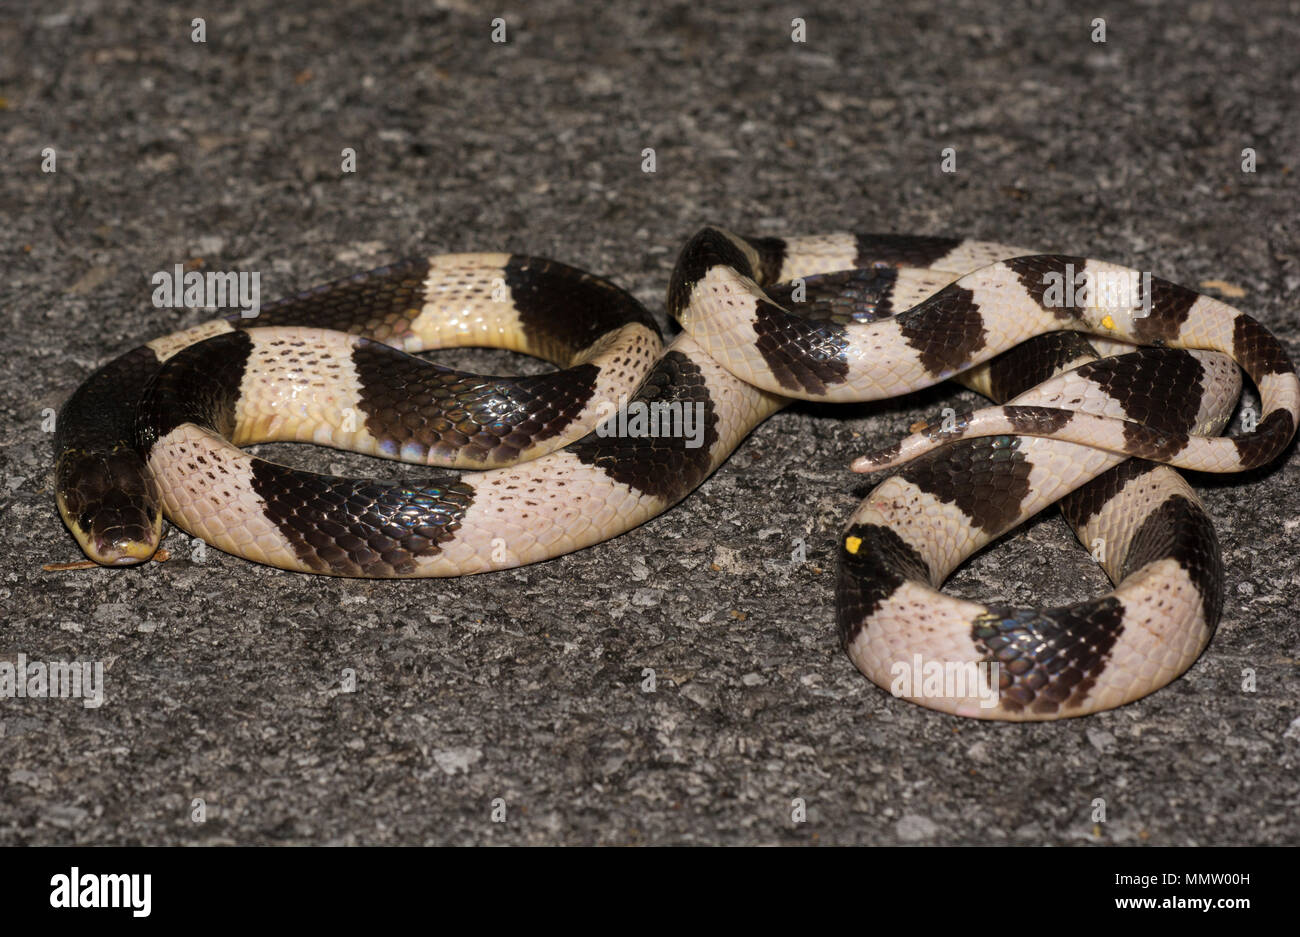 Blue or Malayan Krait (Bungarus candidus) on the road at night Krabi Thailand one of the most venomous snakes in the world. Stock Photo